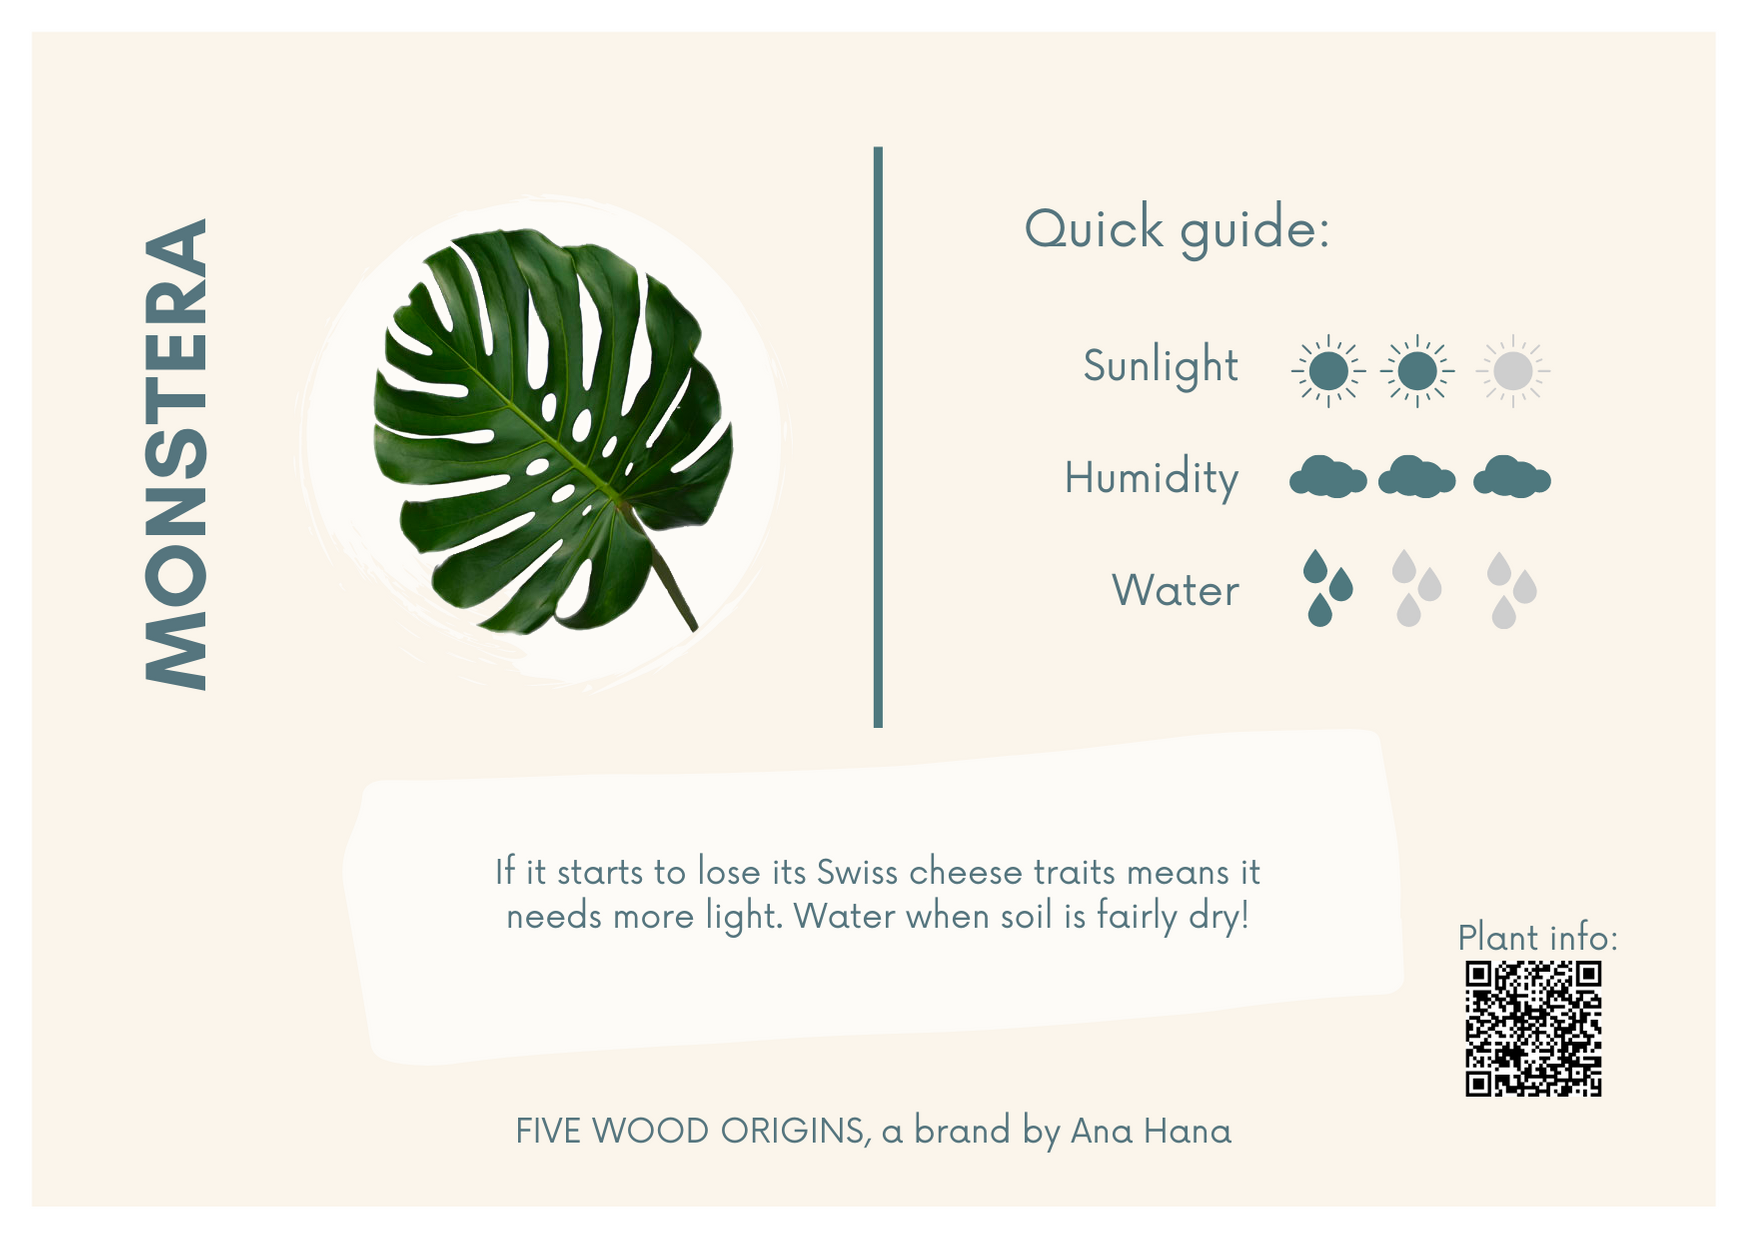 How to grow and care for monstera deliciosa